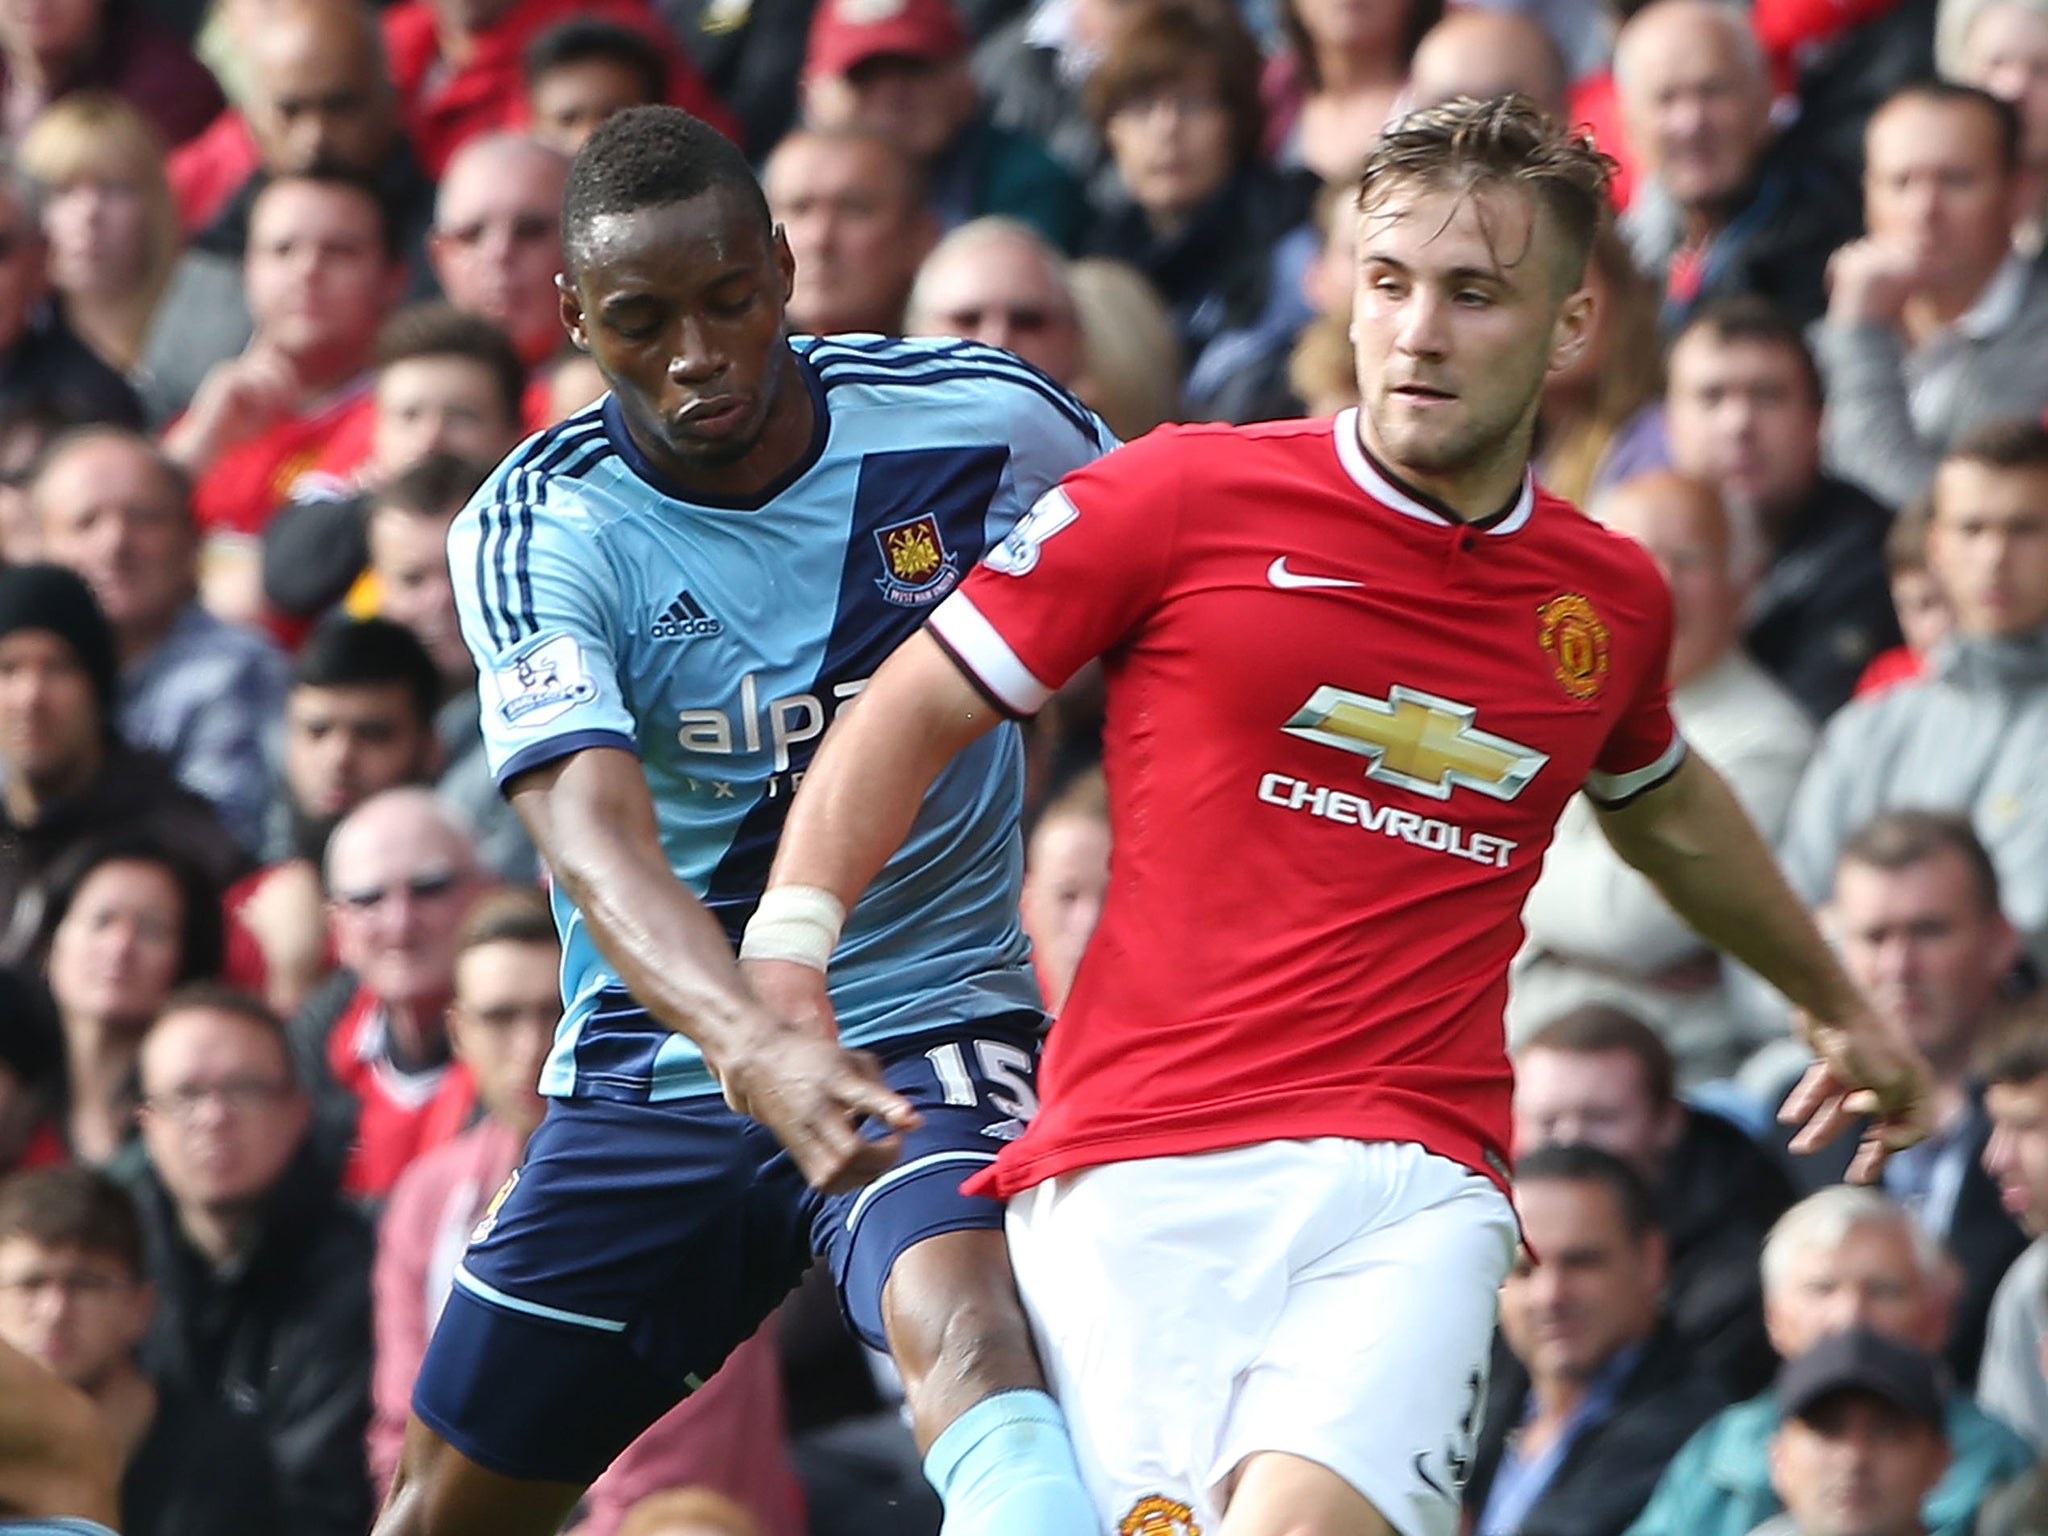 Luke Shaw of Manchester United in action with Diafra Sakho of West Ham